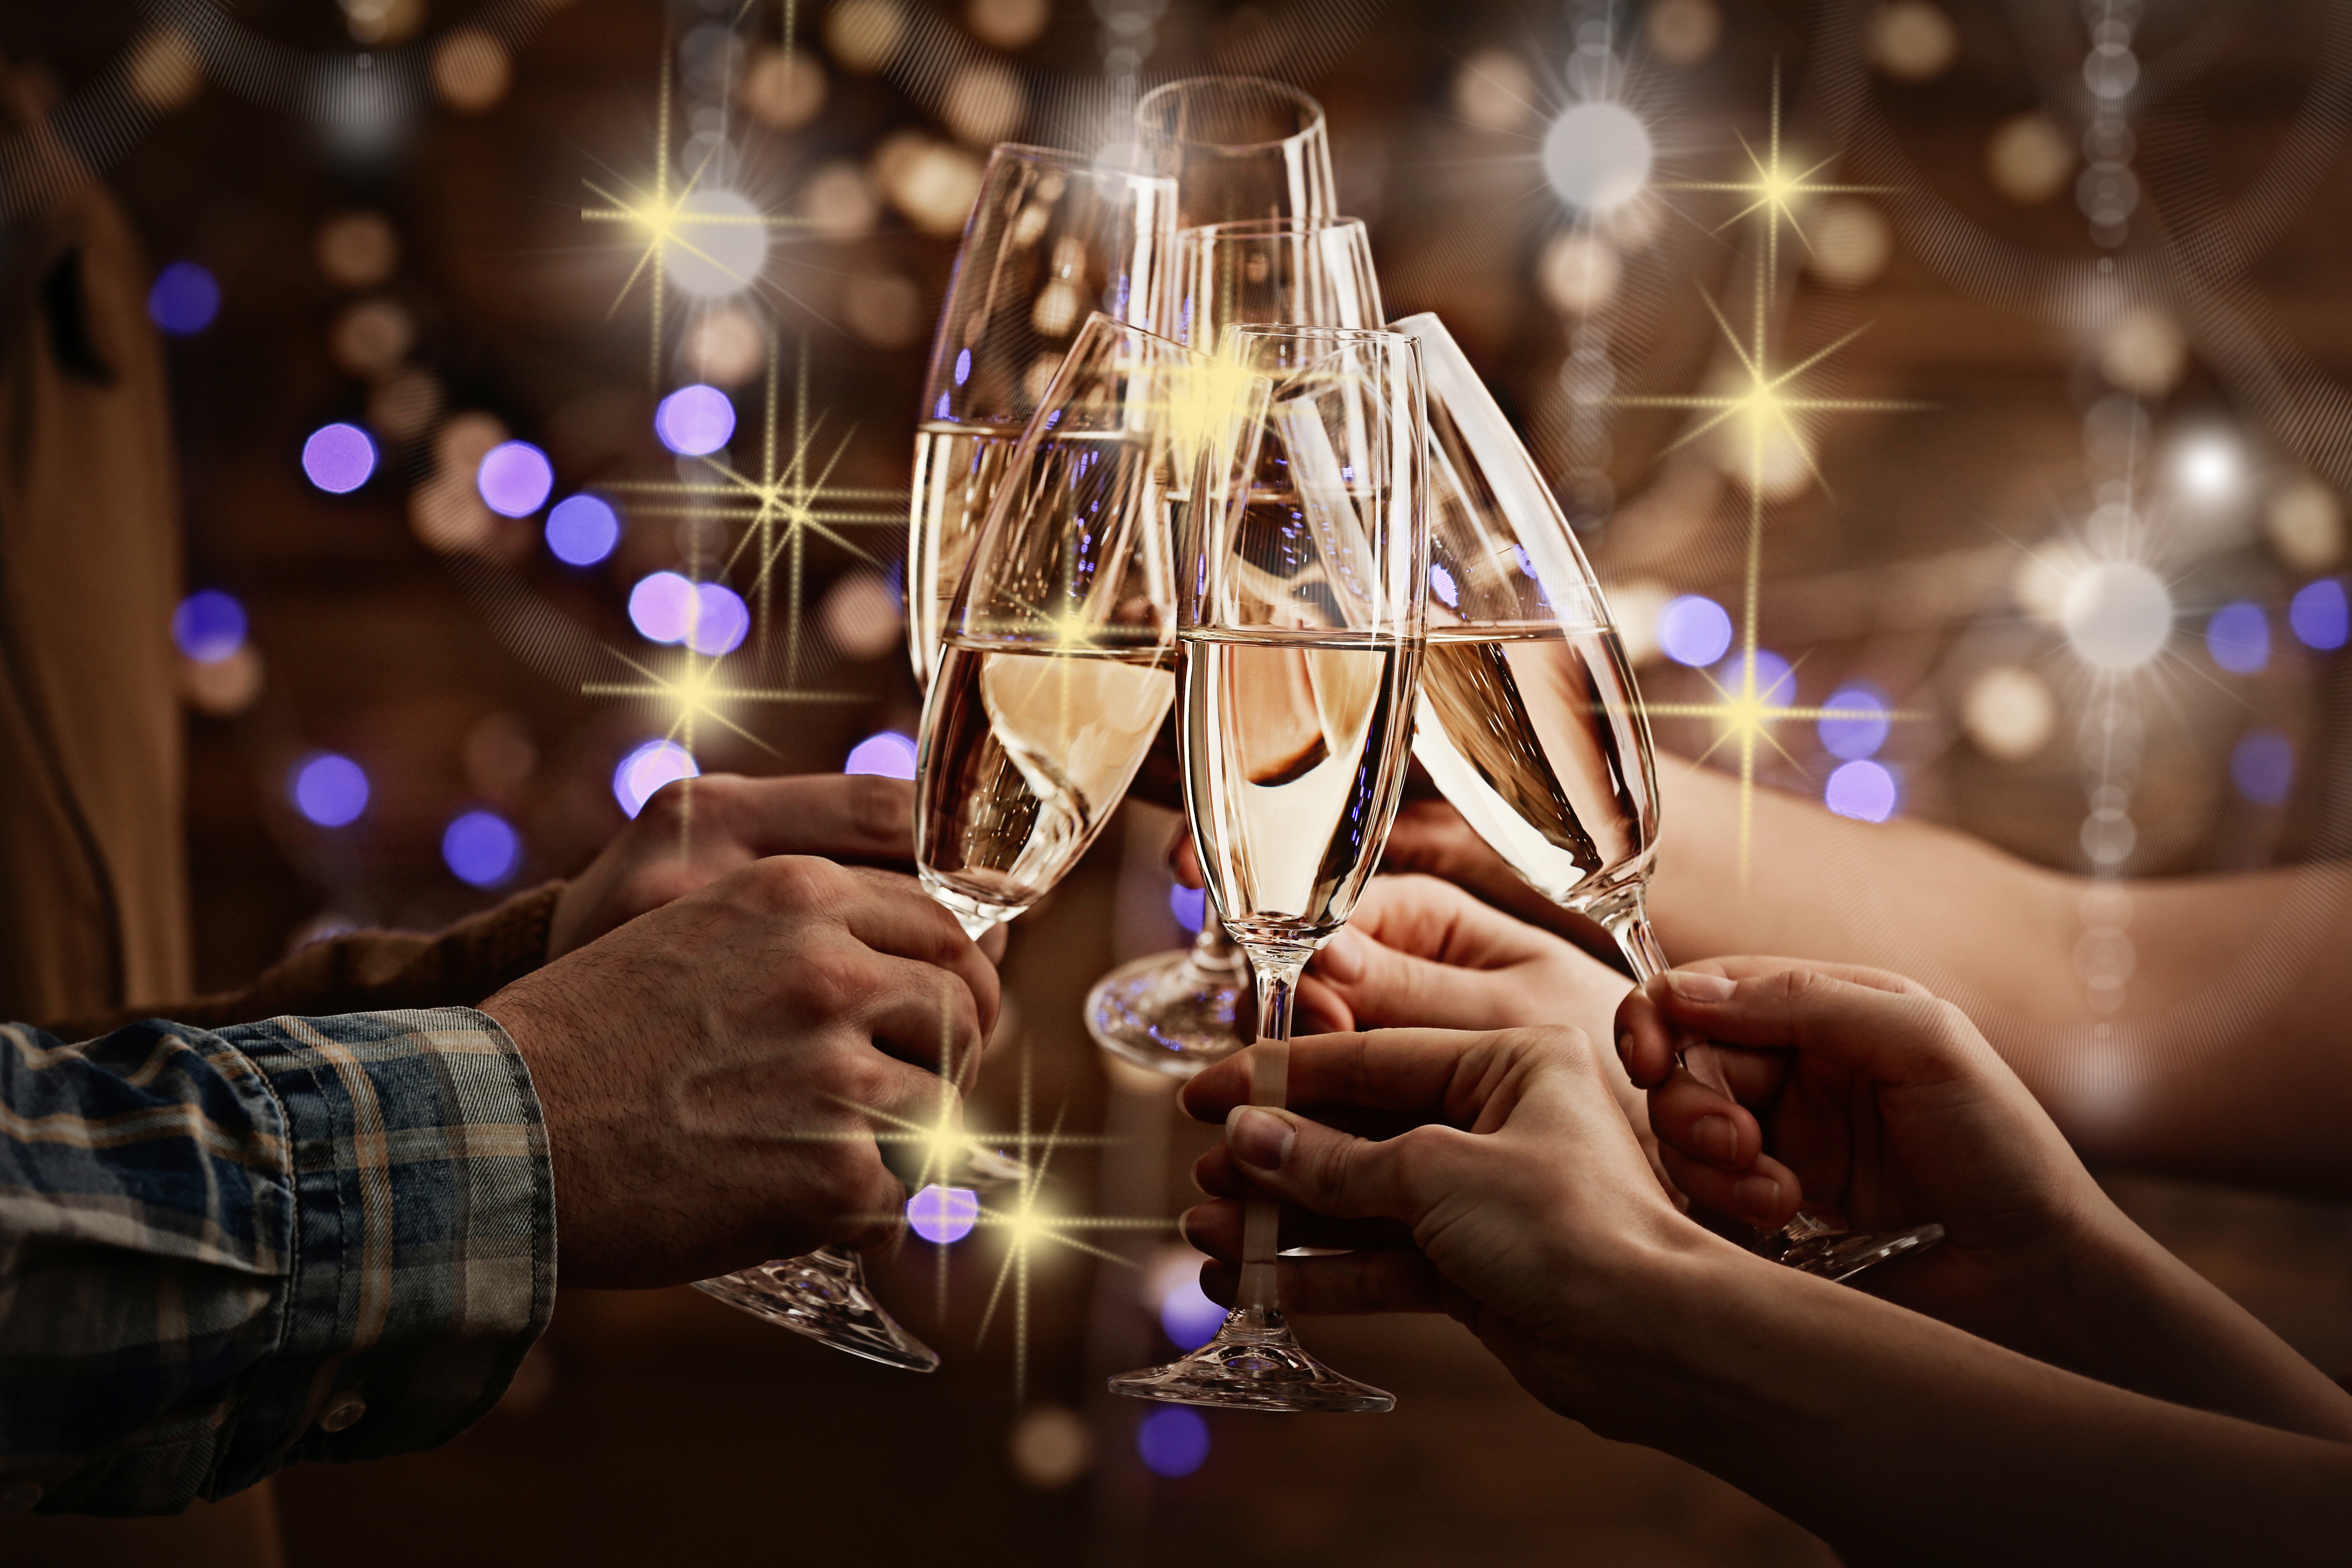 Put some sparkle into festivities with one of these blanc de blancs champagnes.